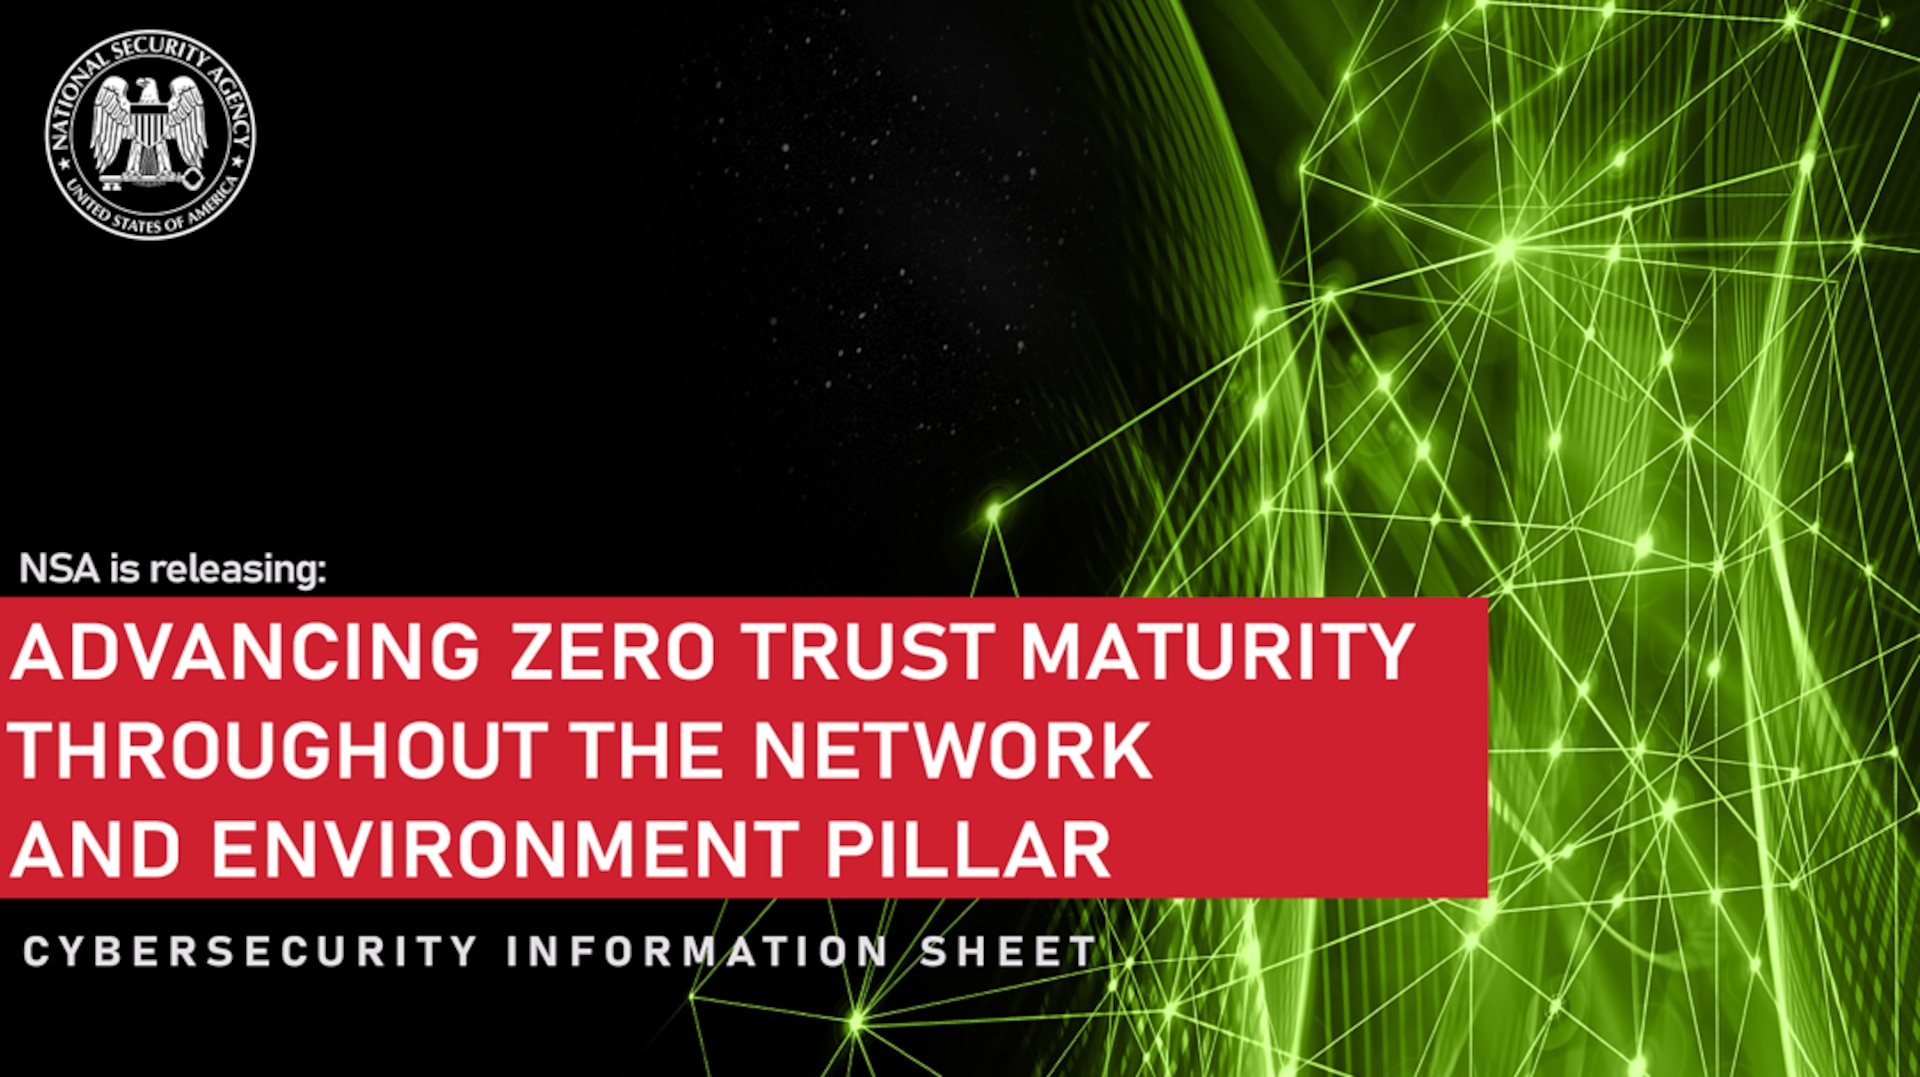 Advancing Zero Trust Maturity Throughout the Network and Environment Pillar